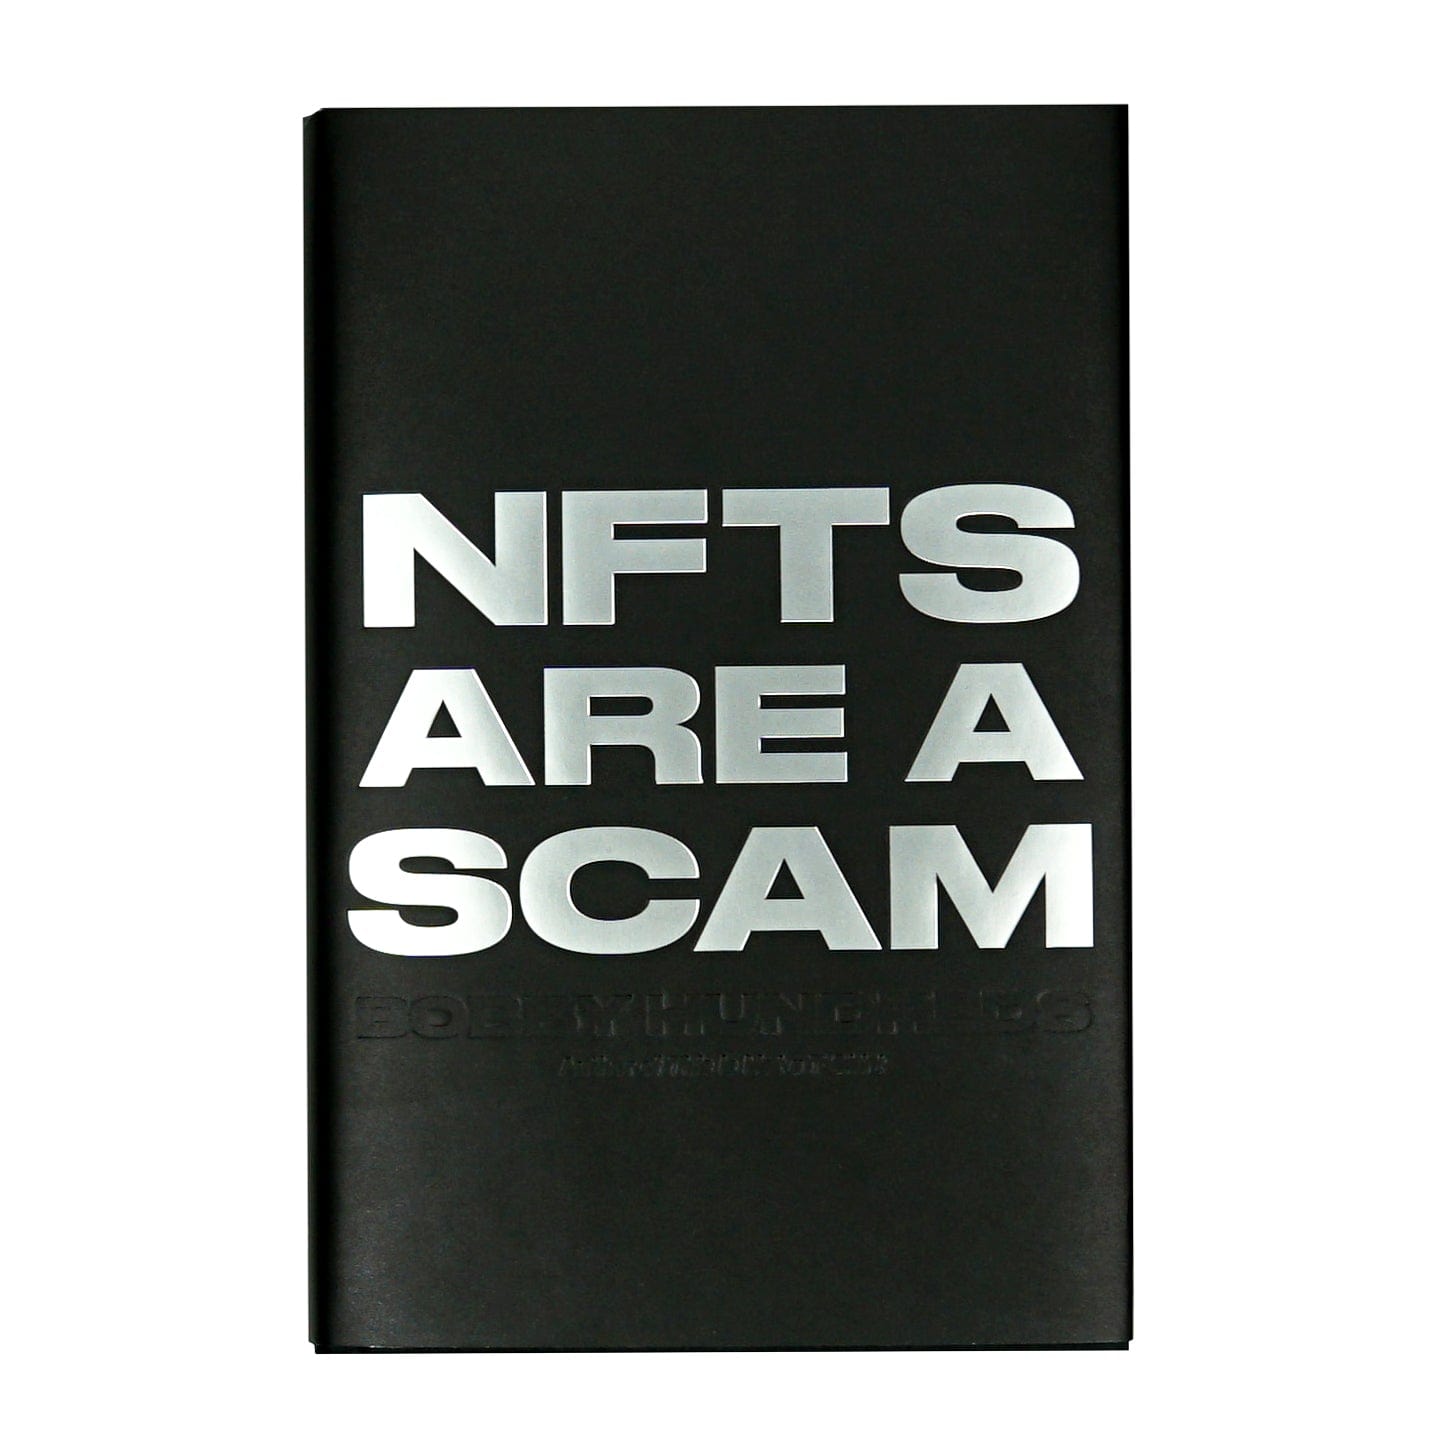 NFTs Are a Scam / NFTs Are the Future: The Early Years: 2020-2023